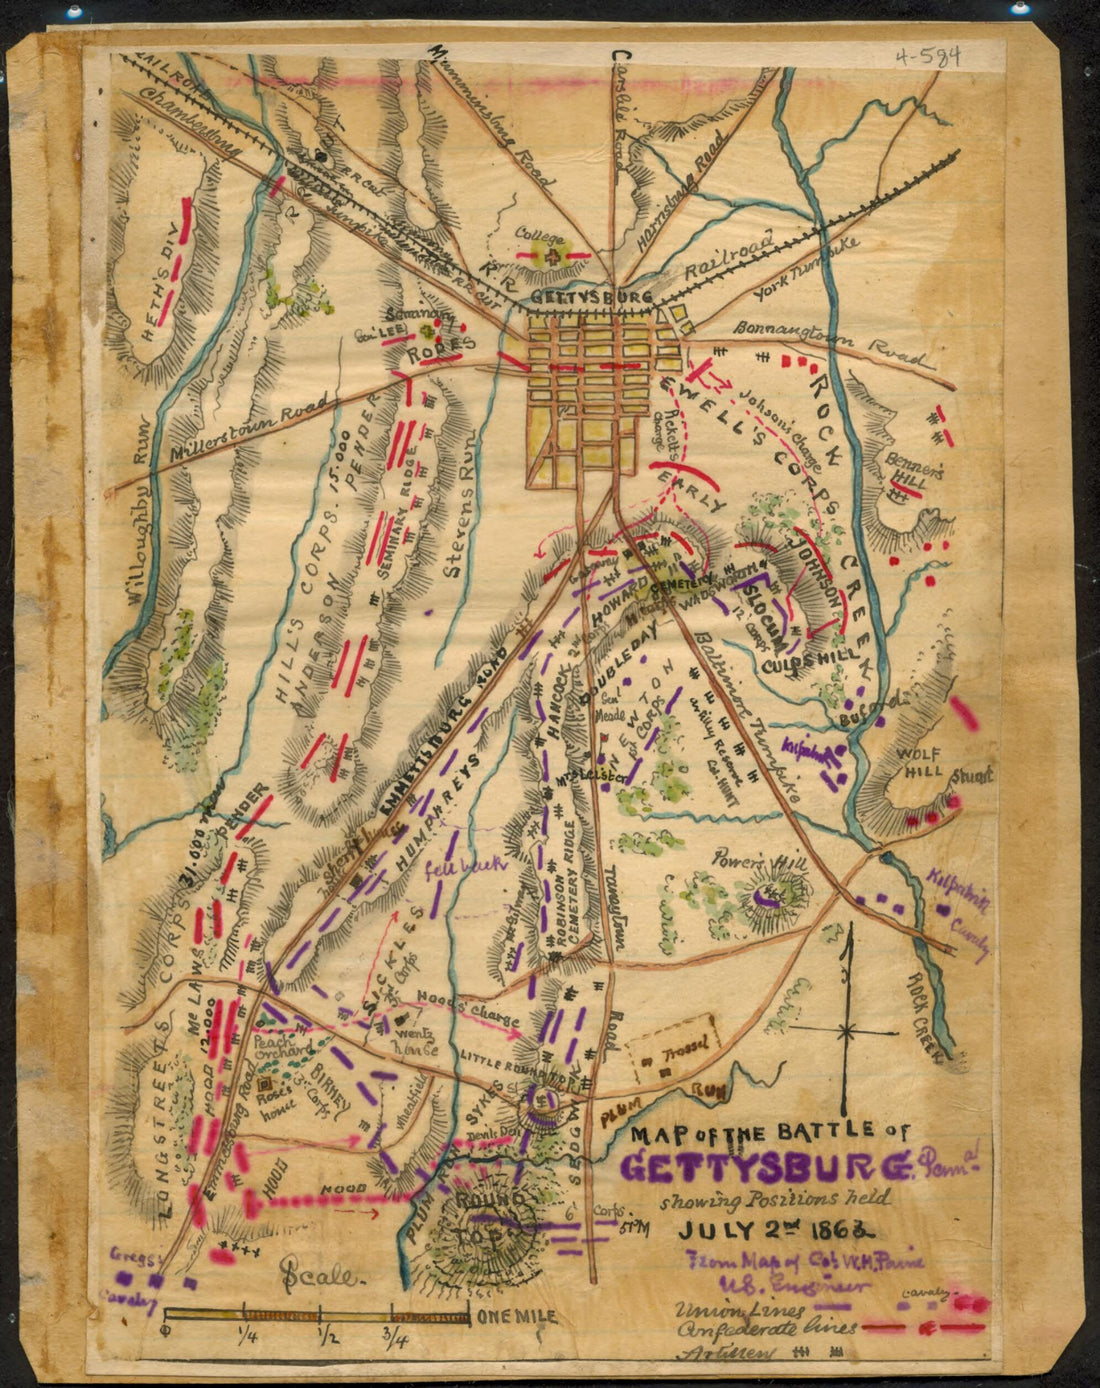 This old map of Map of the Battle of Gettysburg, Penna. : Showing Positions Held July 2nd 1863 from 07-02 was created by William H. Paine, Robert Knox Sneden in 07-02